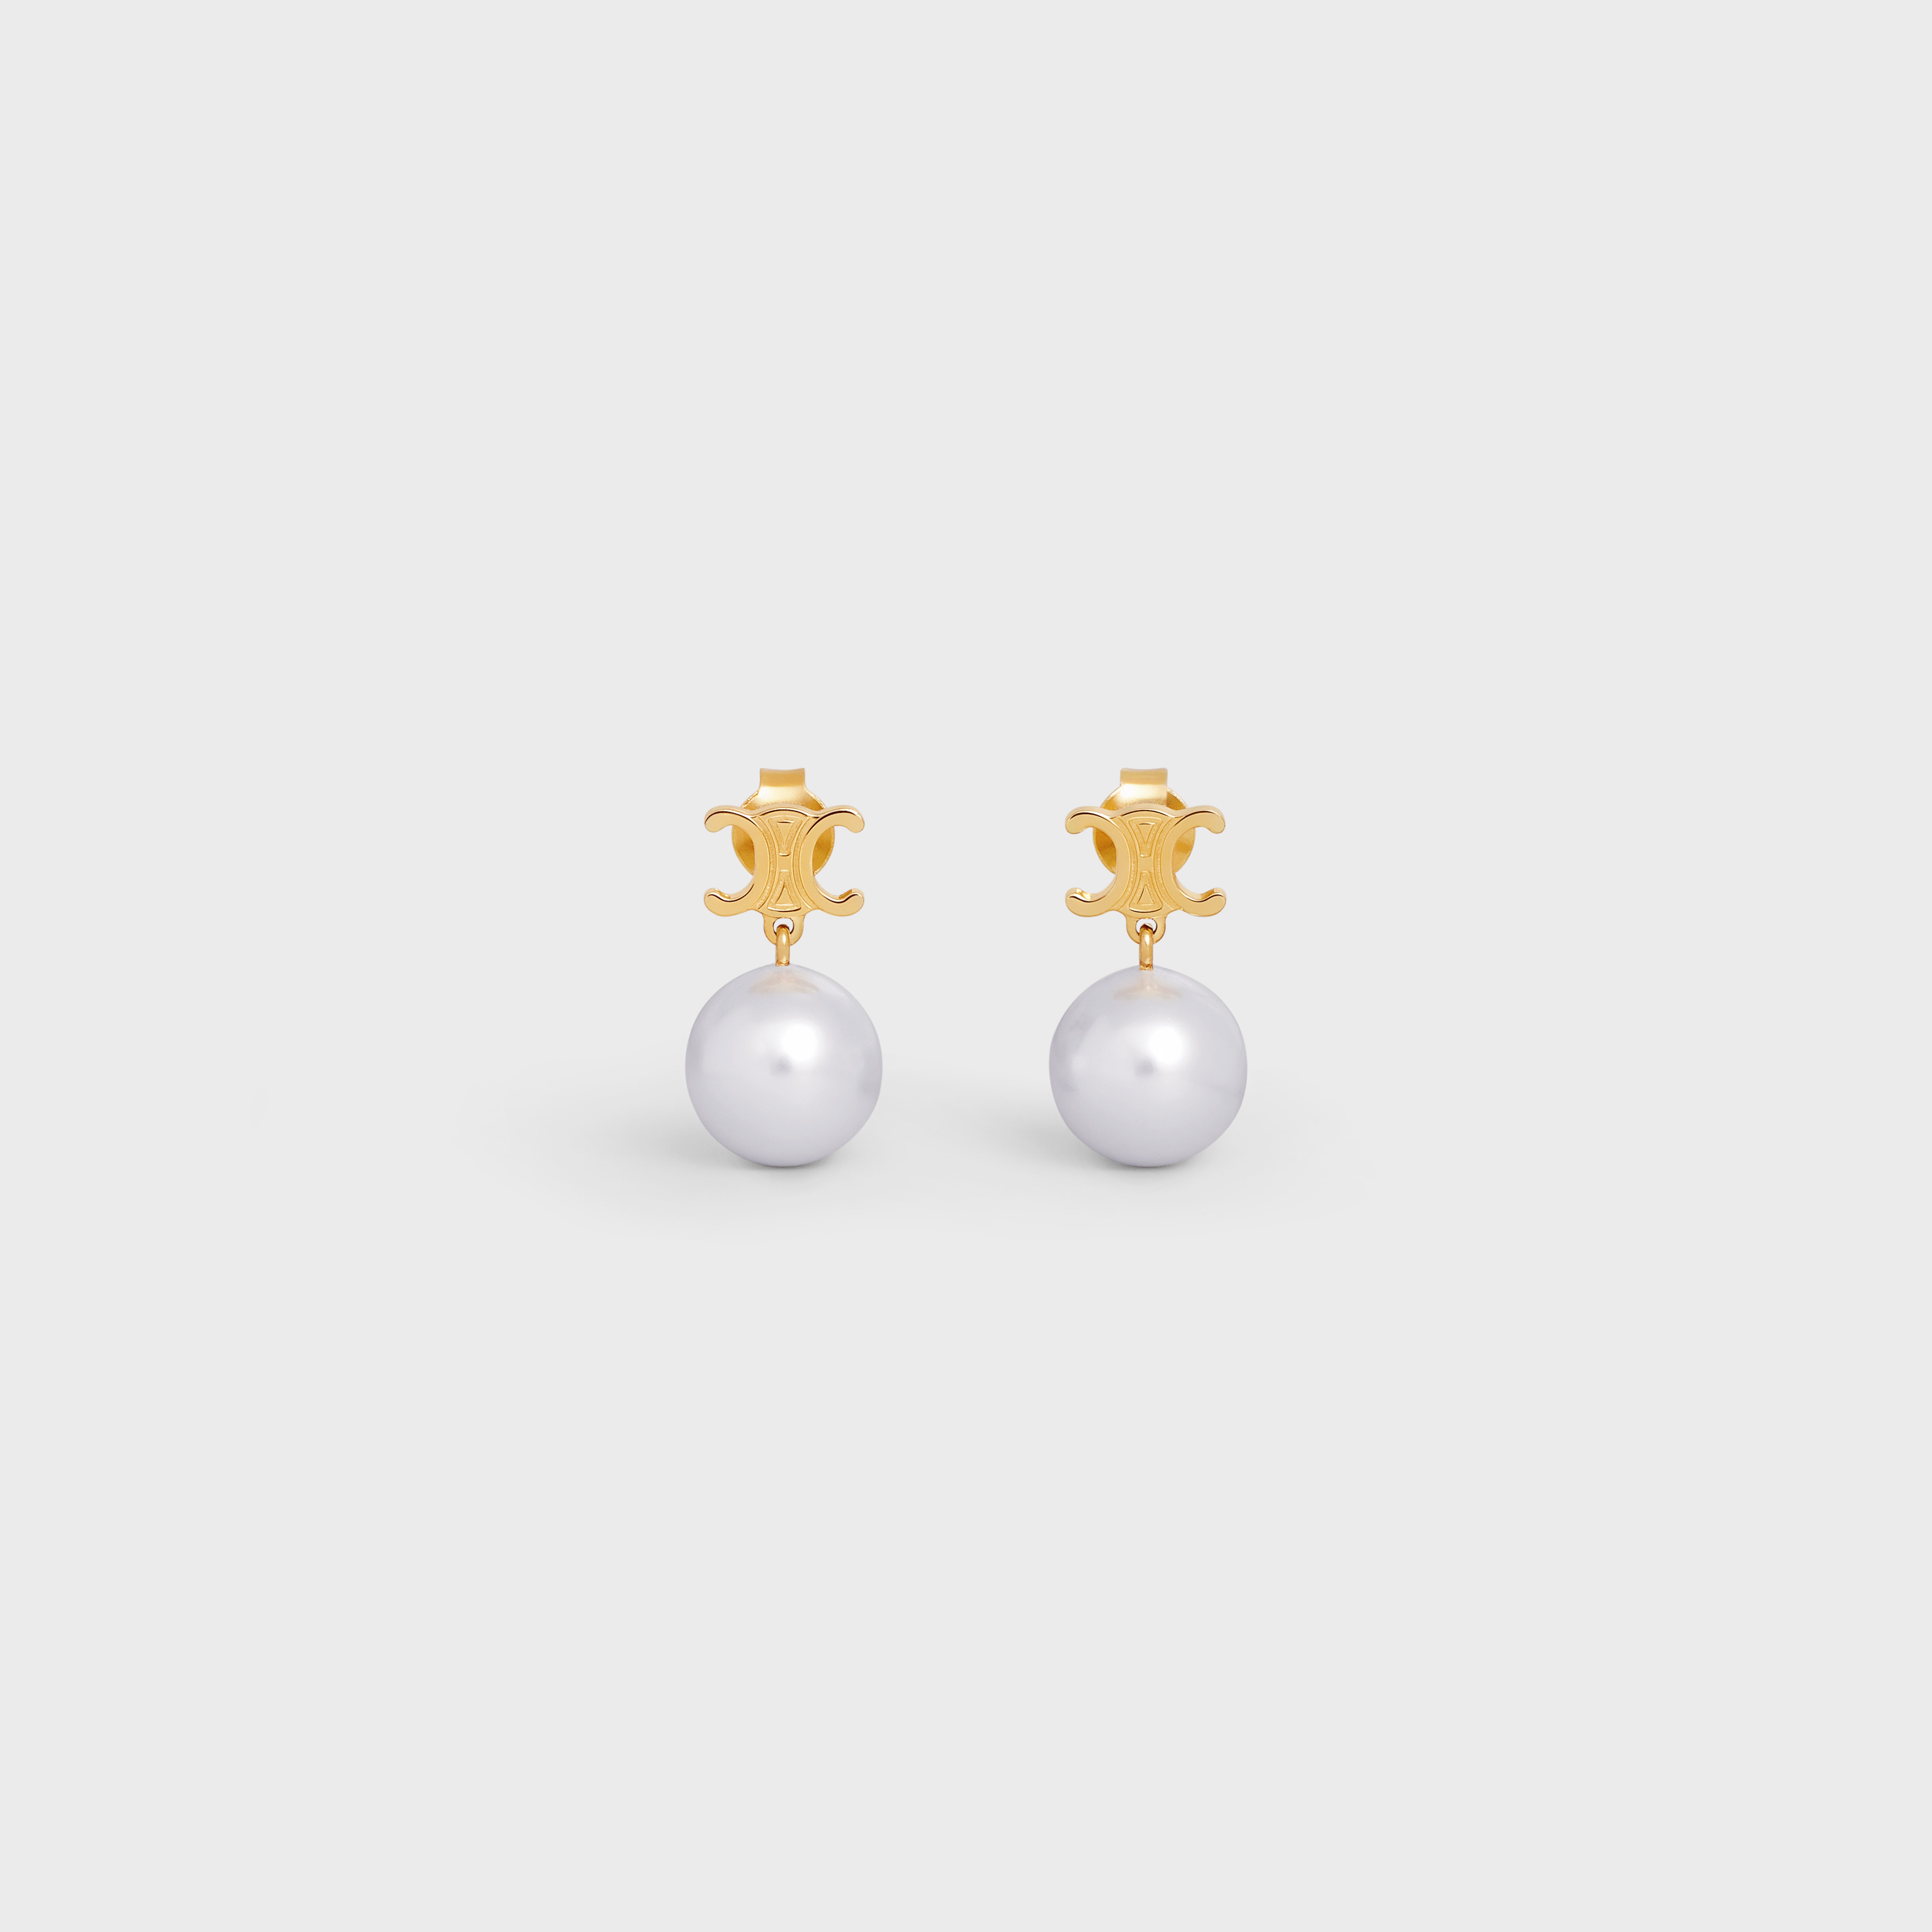 Triomphe Pearl Earrings in Brass with Gold Finish and Glass Pearls - 1